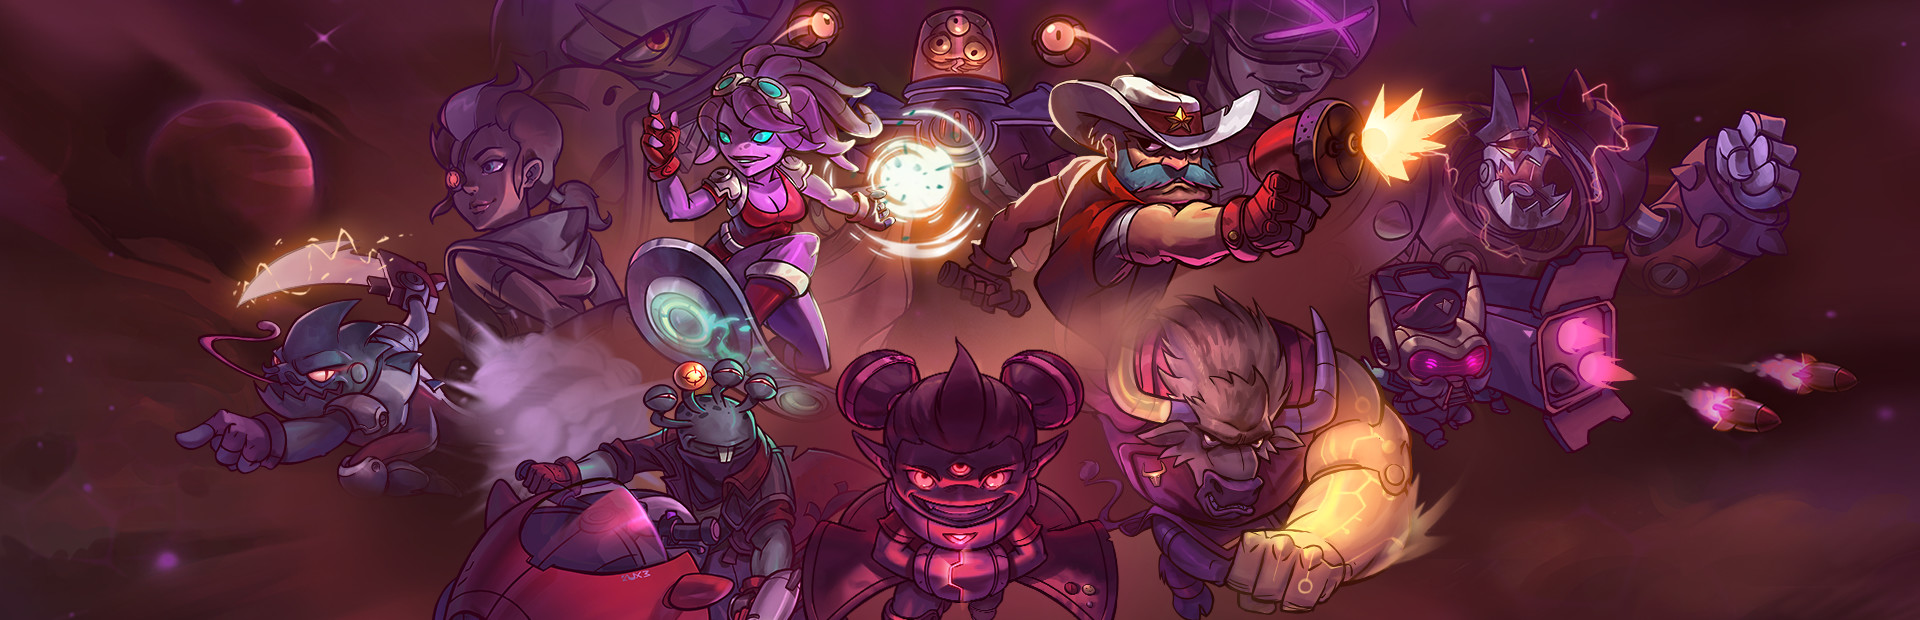 Awesomenauts - the 2D moba cover image